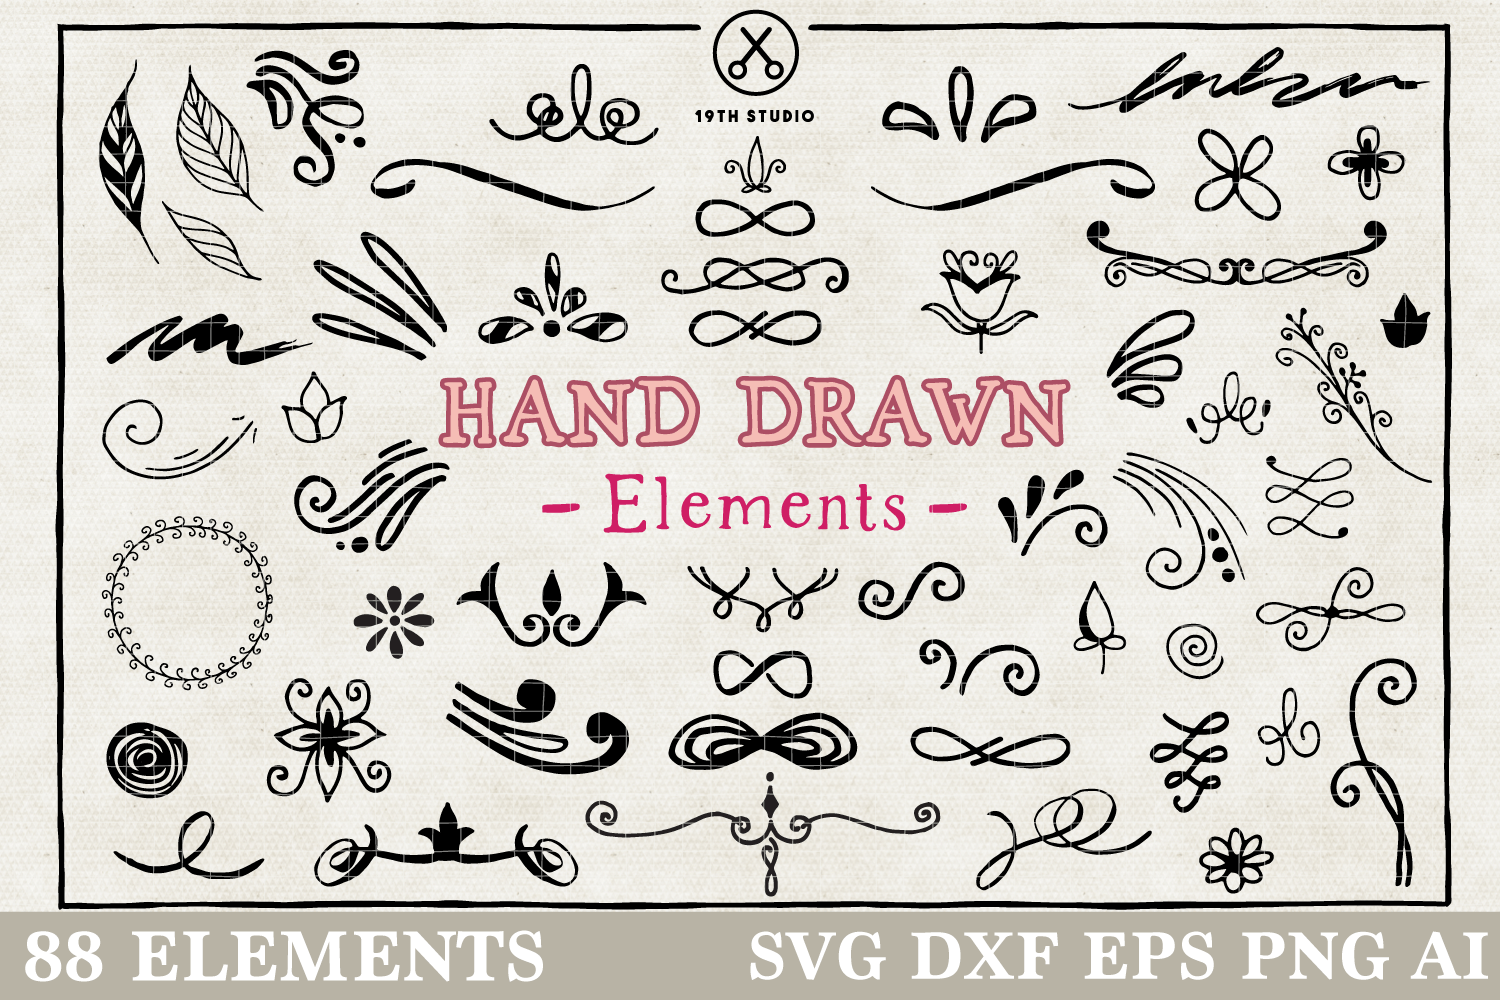 Hand Drawn Elements Pack - VB18 Craft House SVG - SVG files for Cricut and Silhouette